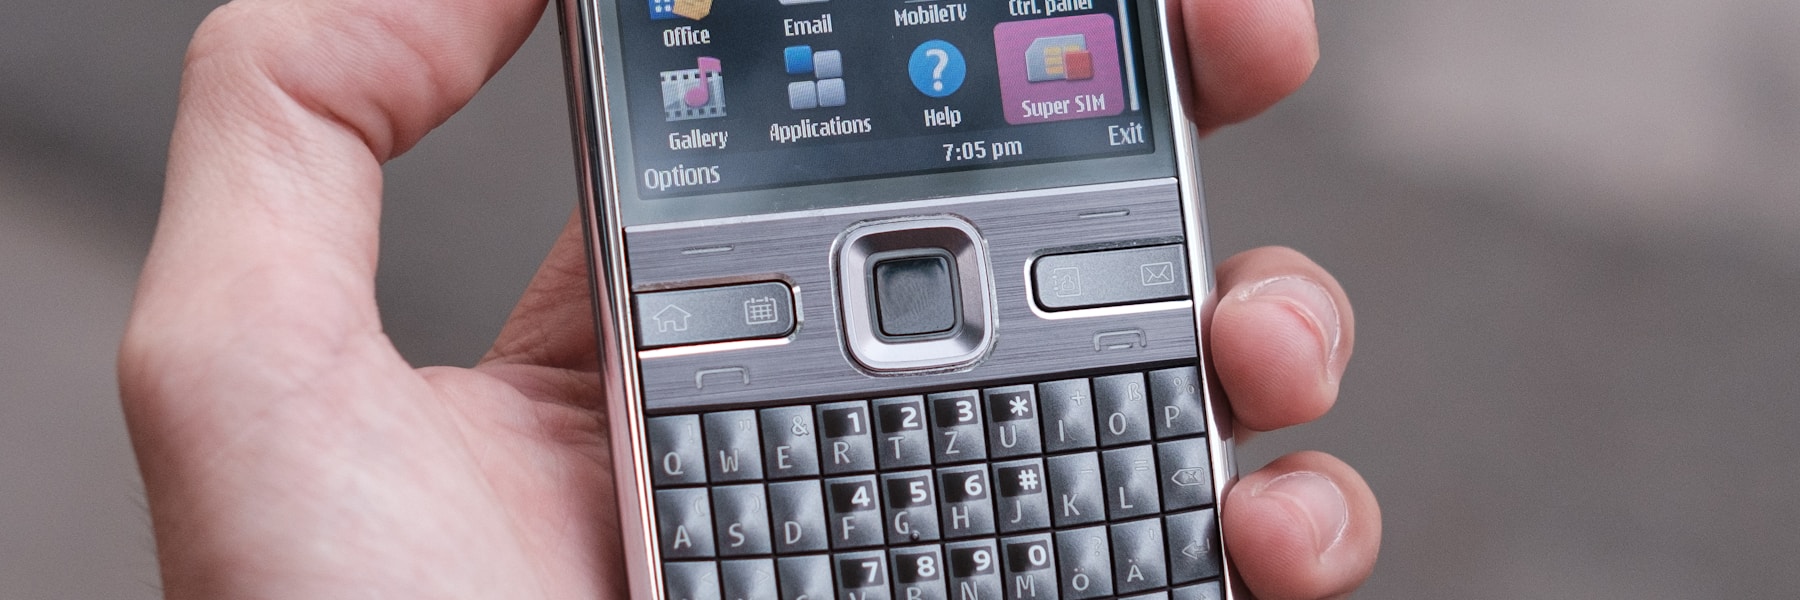 person holding gray nokia qwerty phone